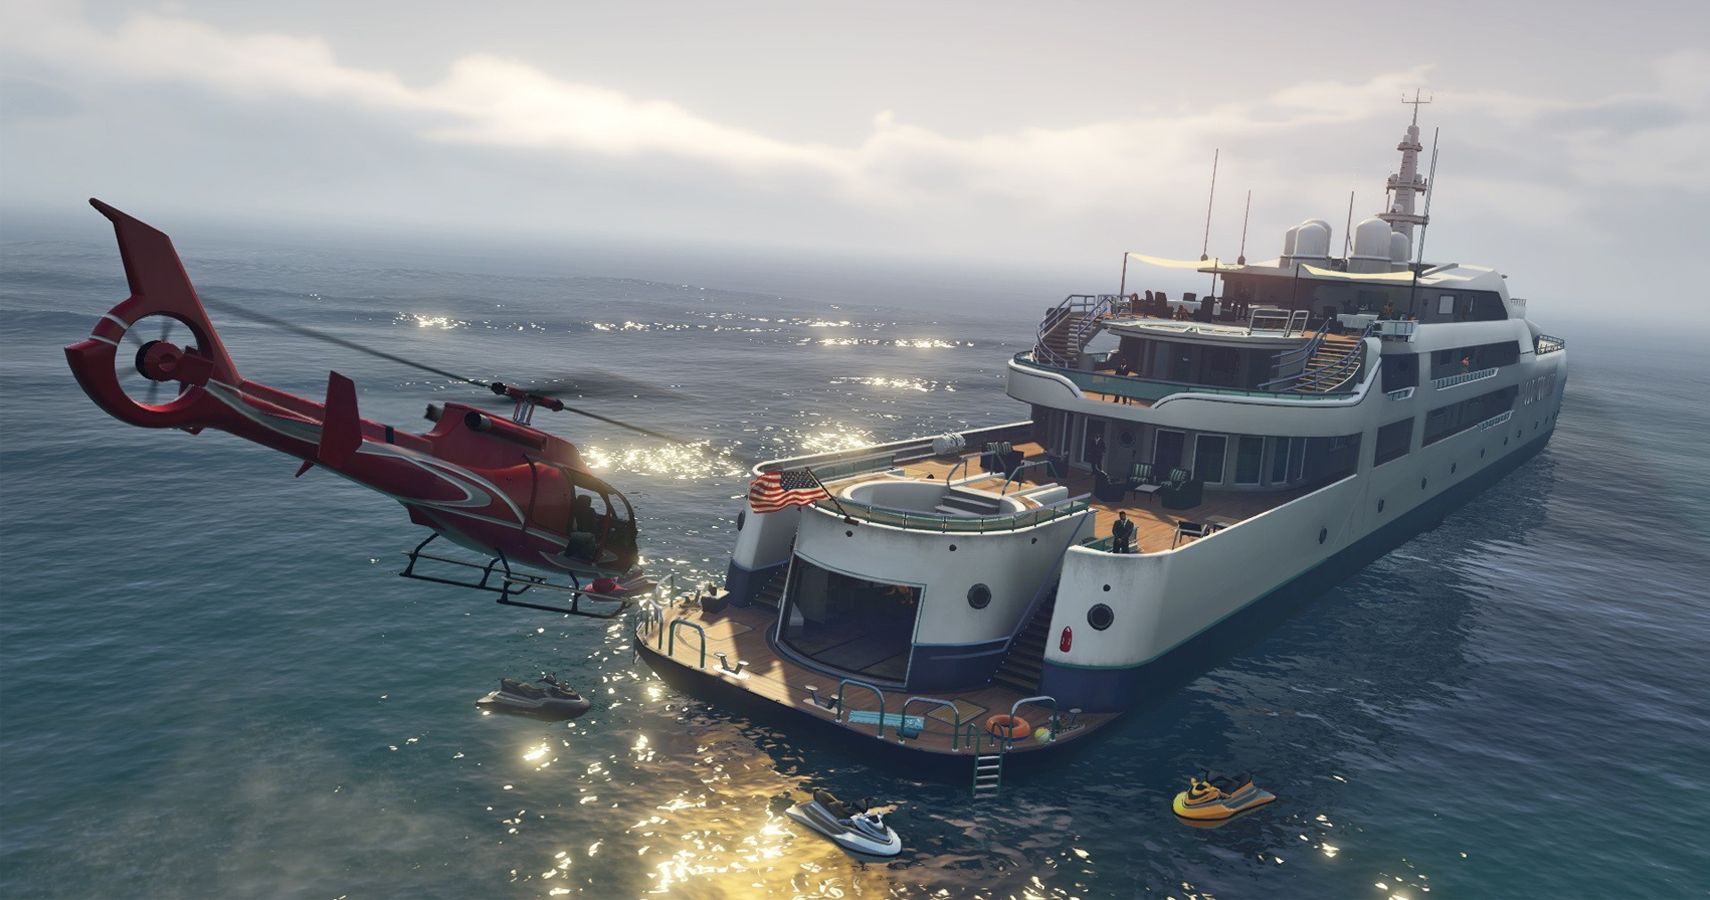 15 Ways To DOMINATE At Grand Theft Auto Online